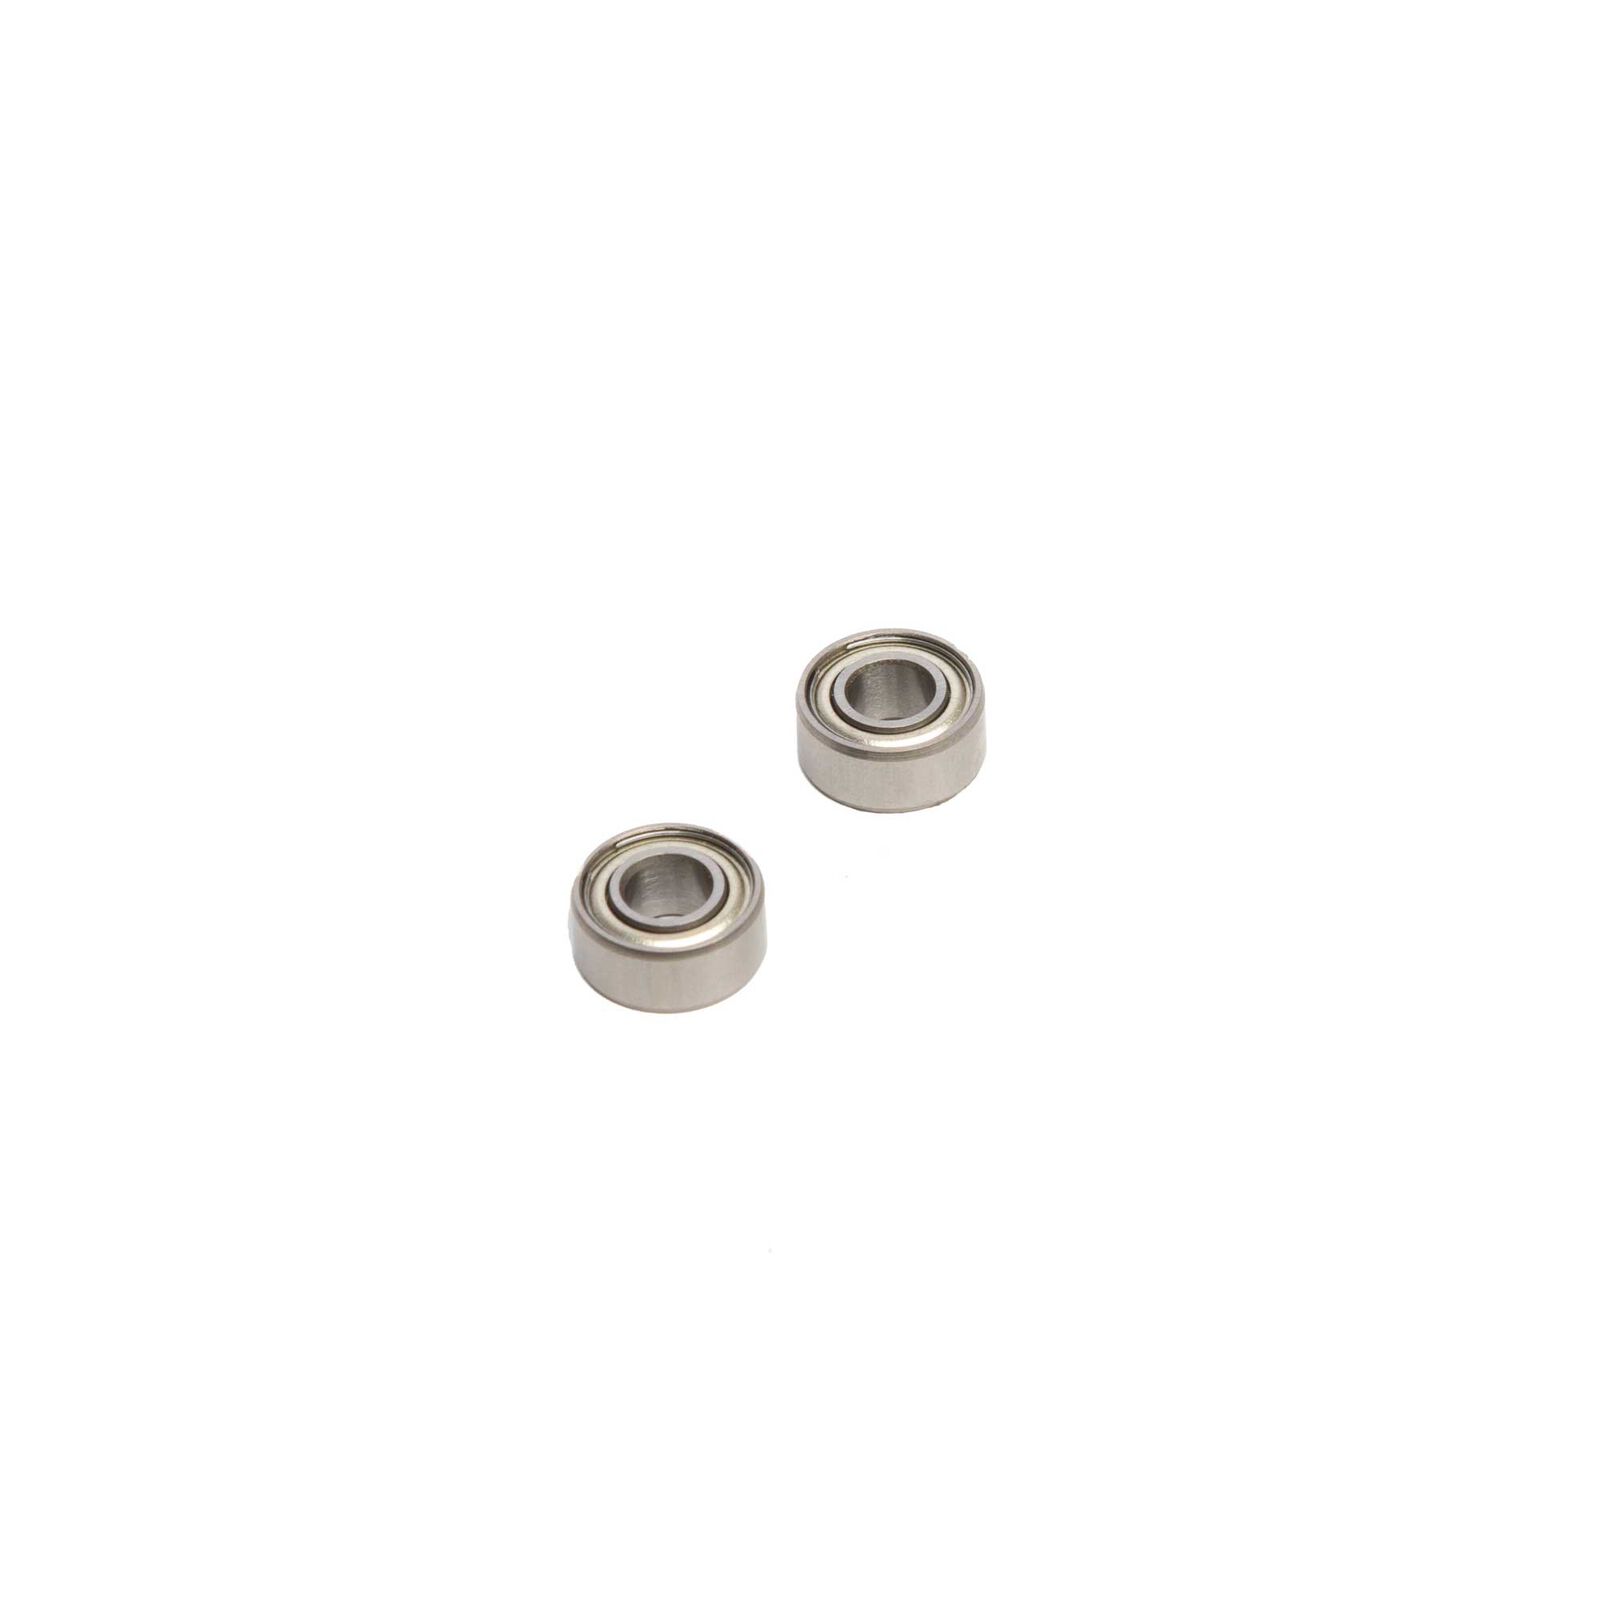 Radial Bearing, 4 x 9 x 4mm: Infusion 180